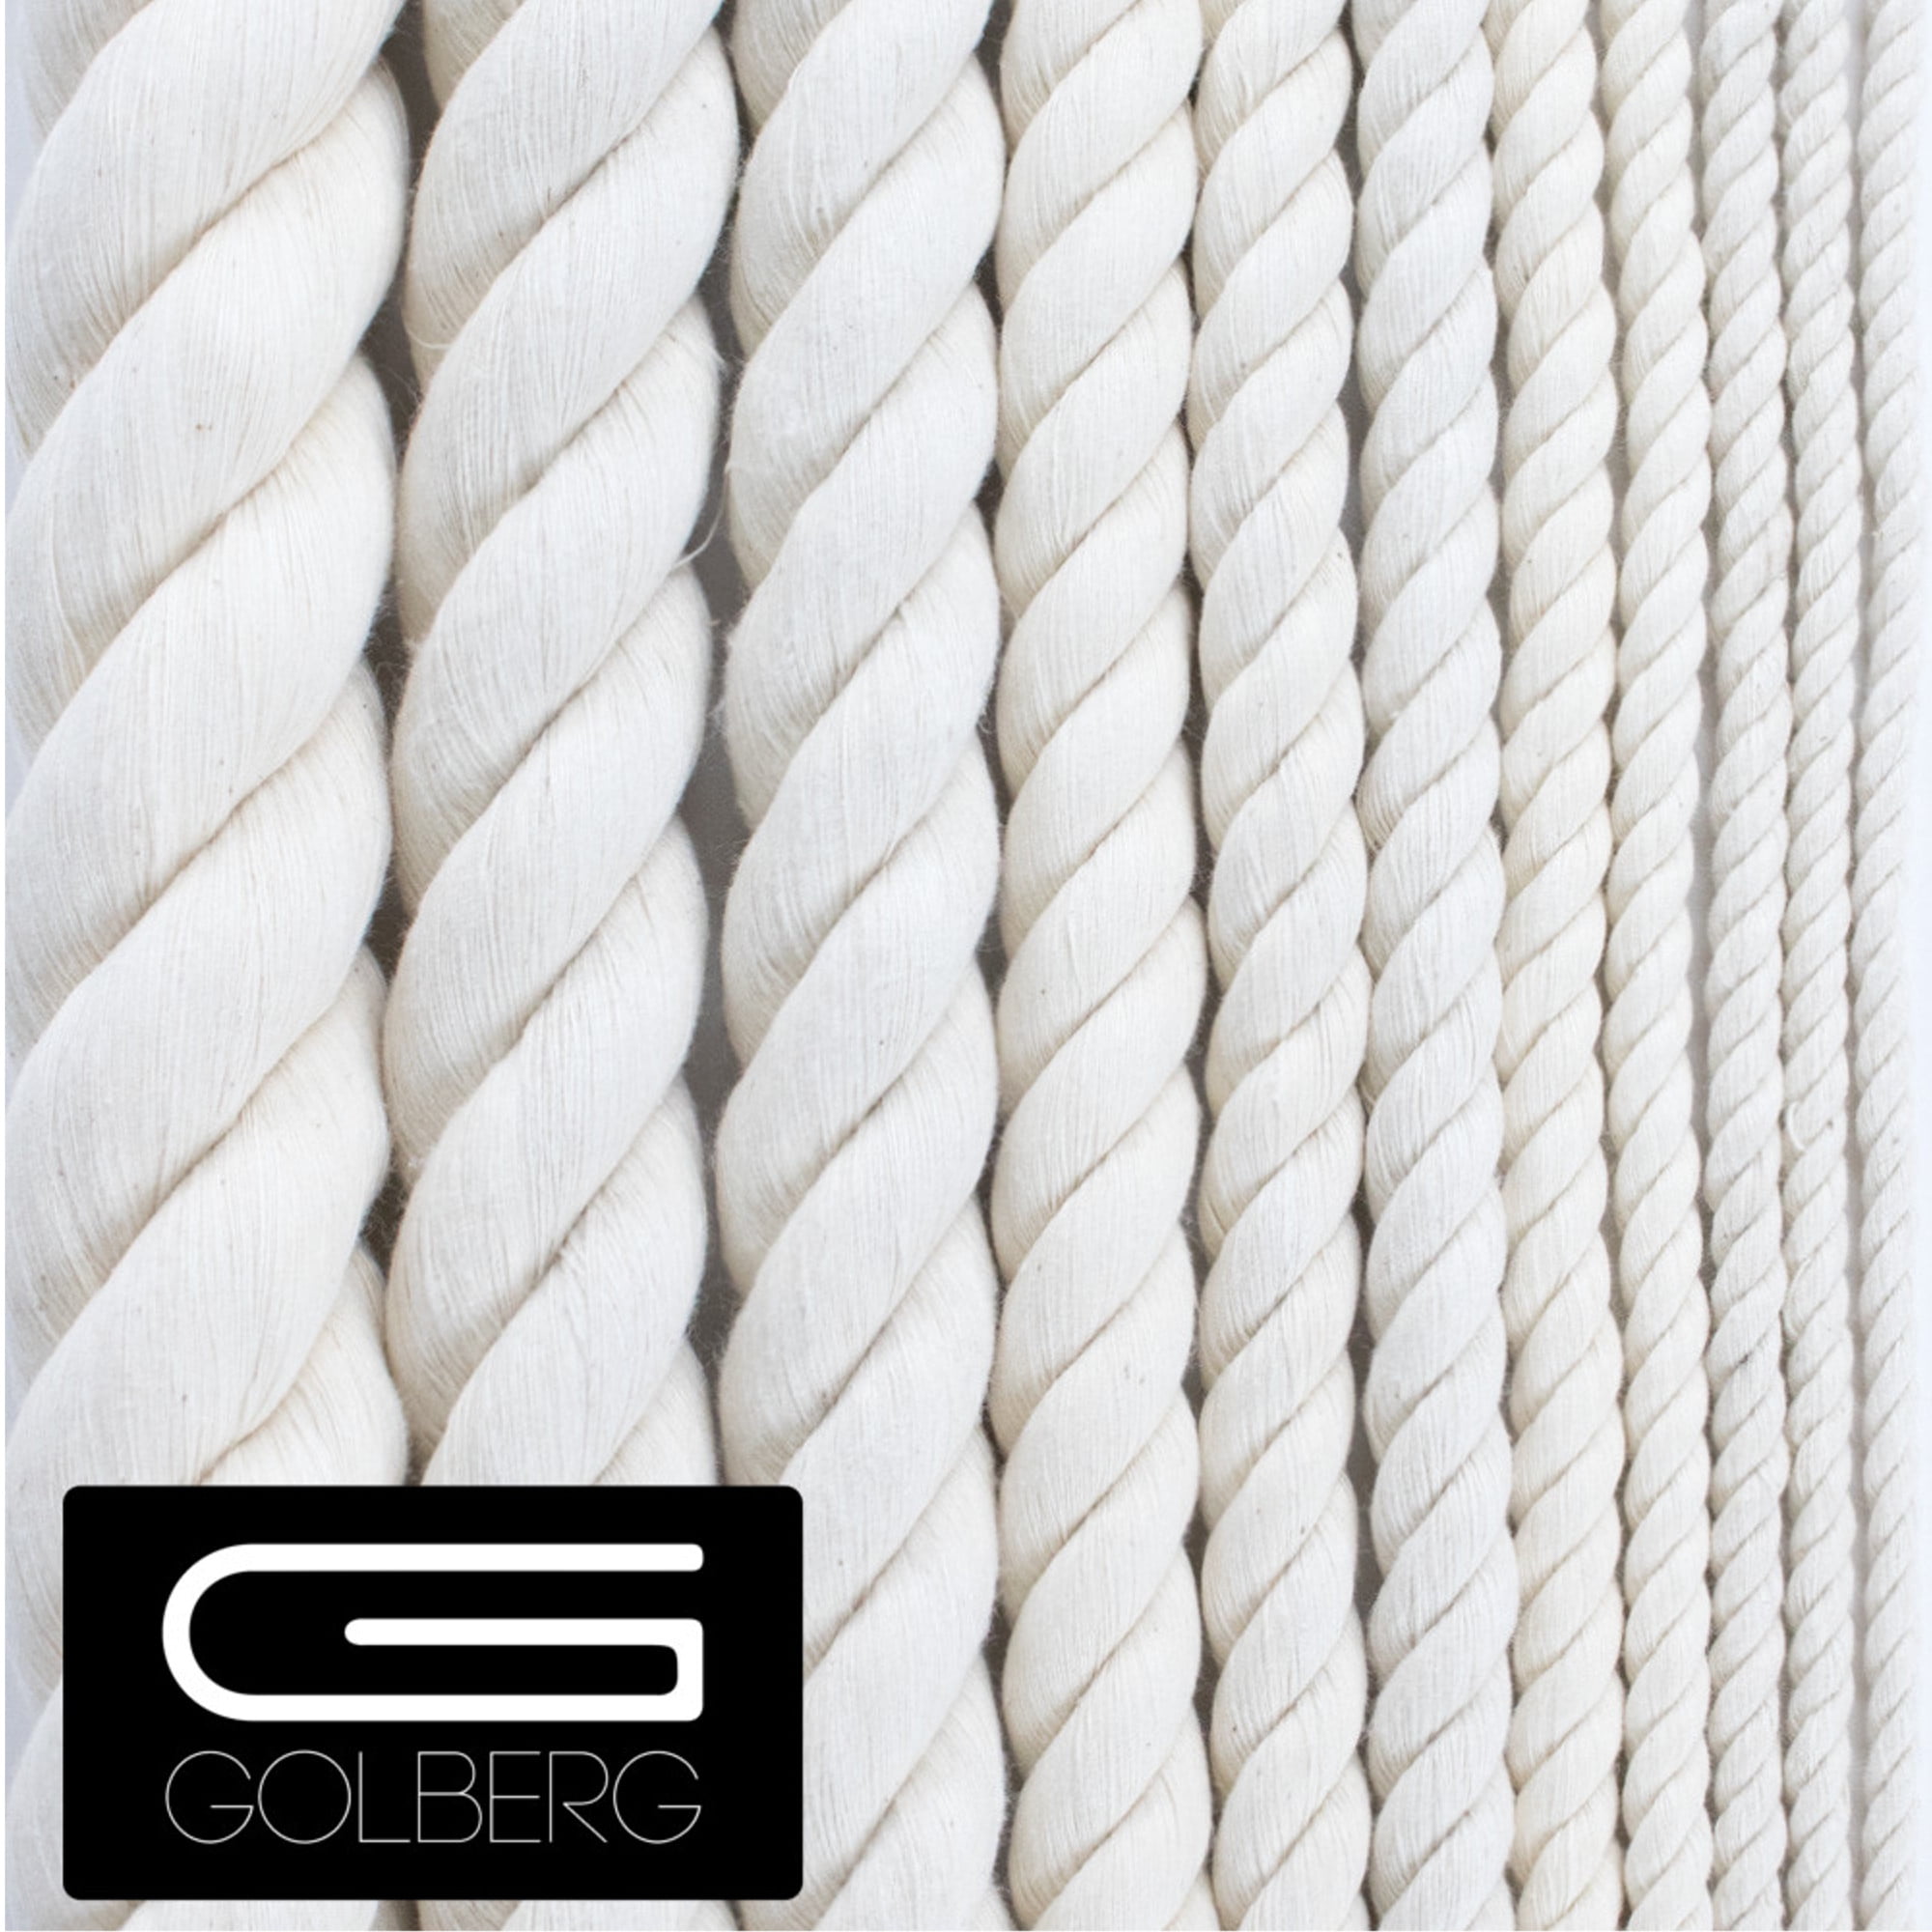 GOLBERG Twisted 100% Natural Cotton Rope White Cotton Rope 3/8 Inch x 10 Feet 